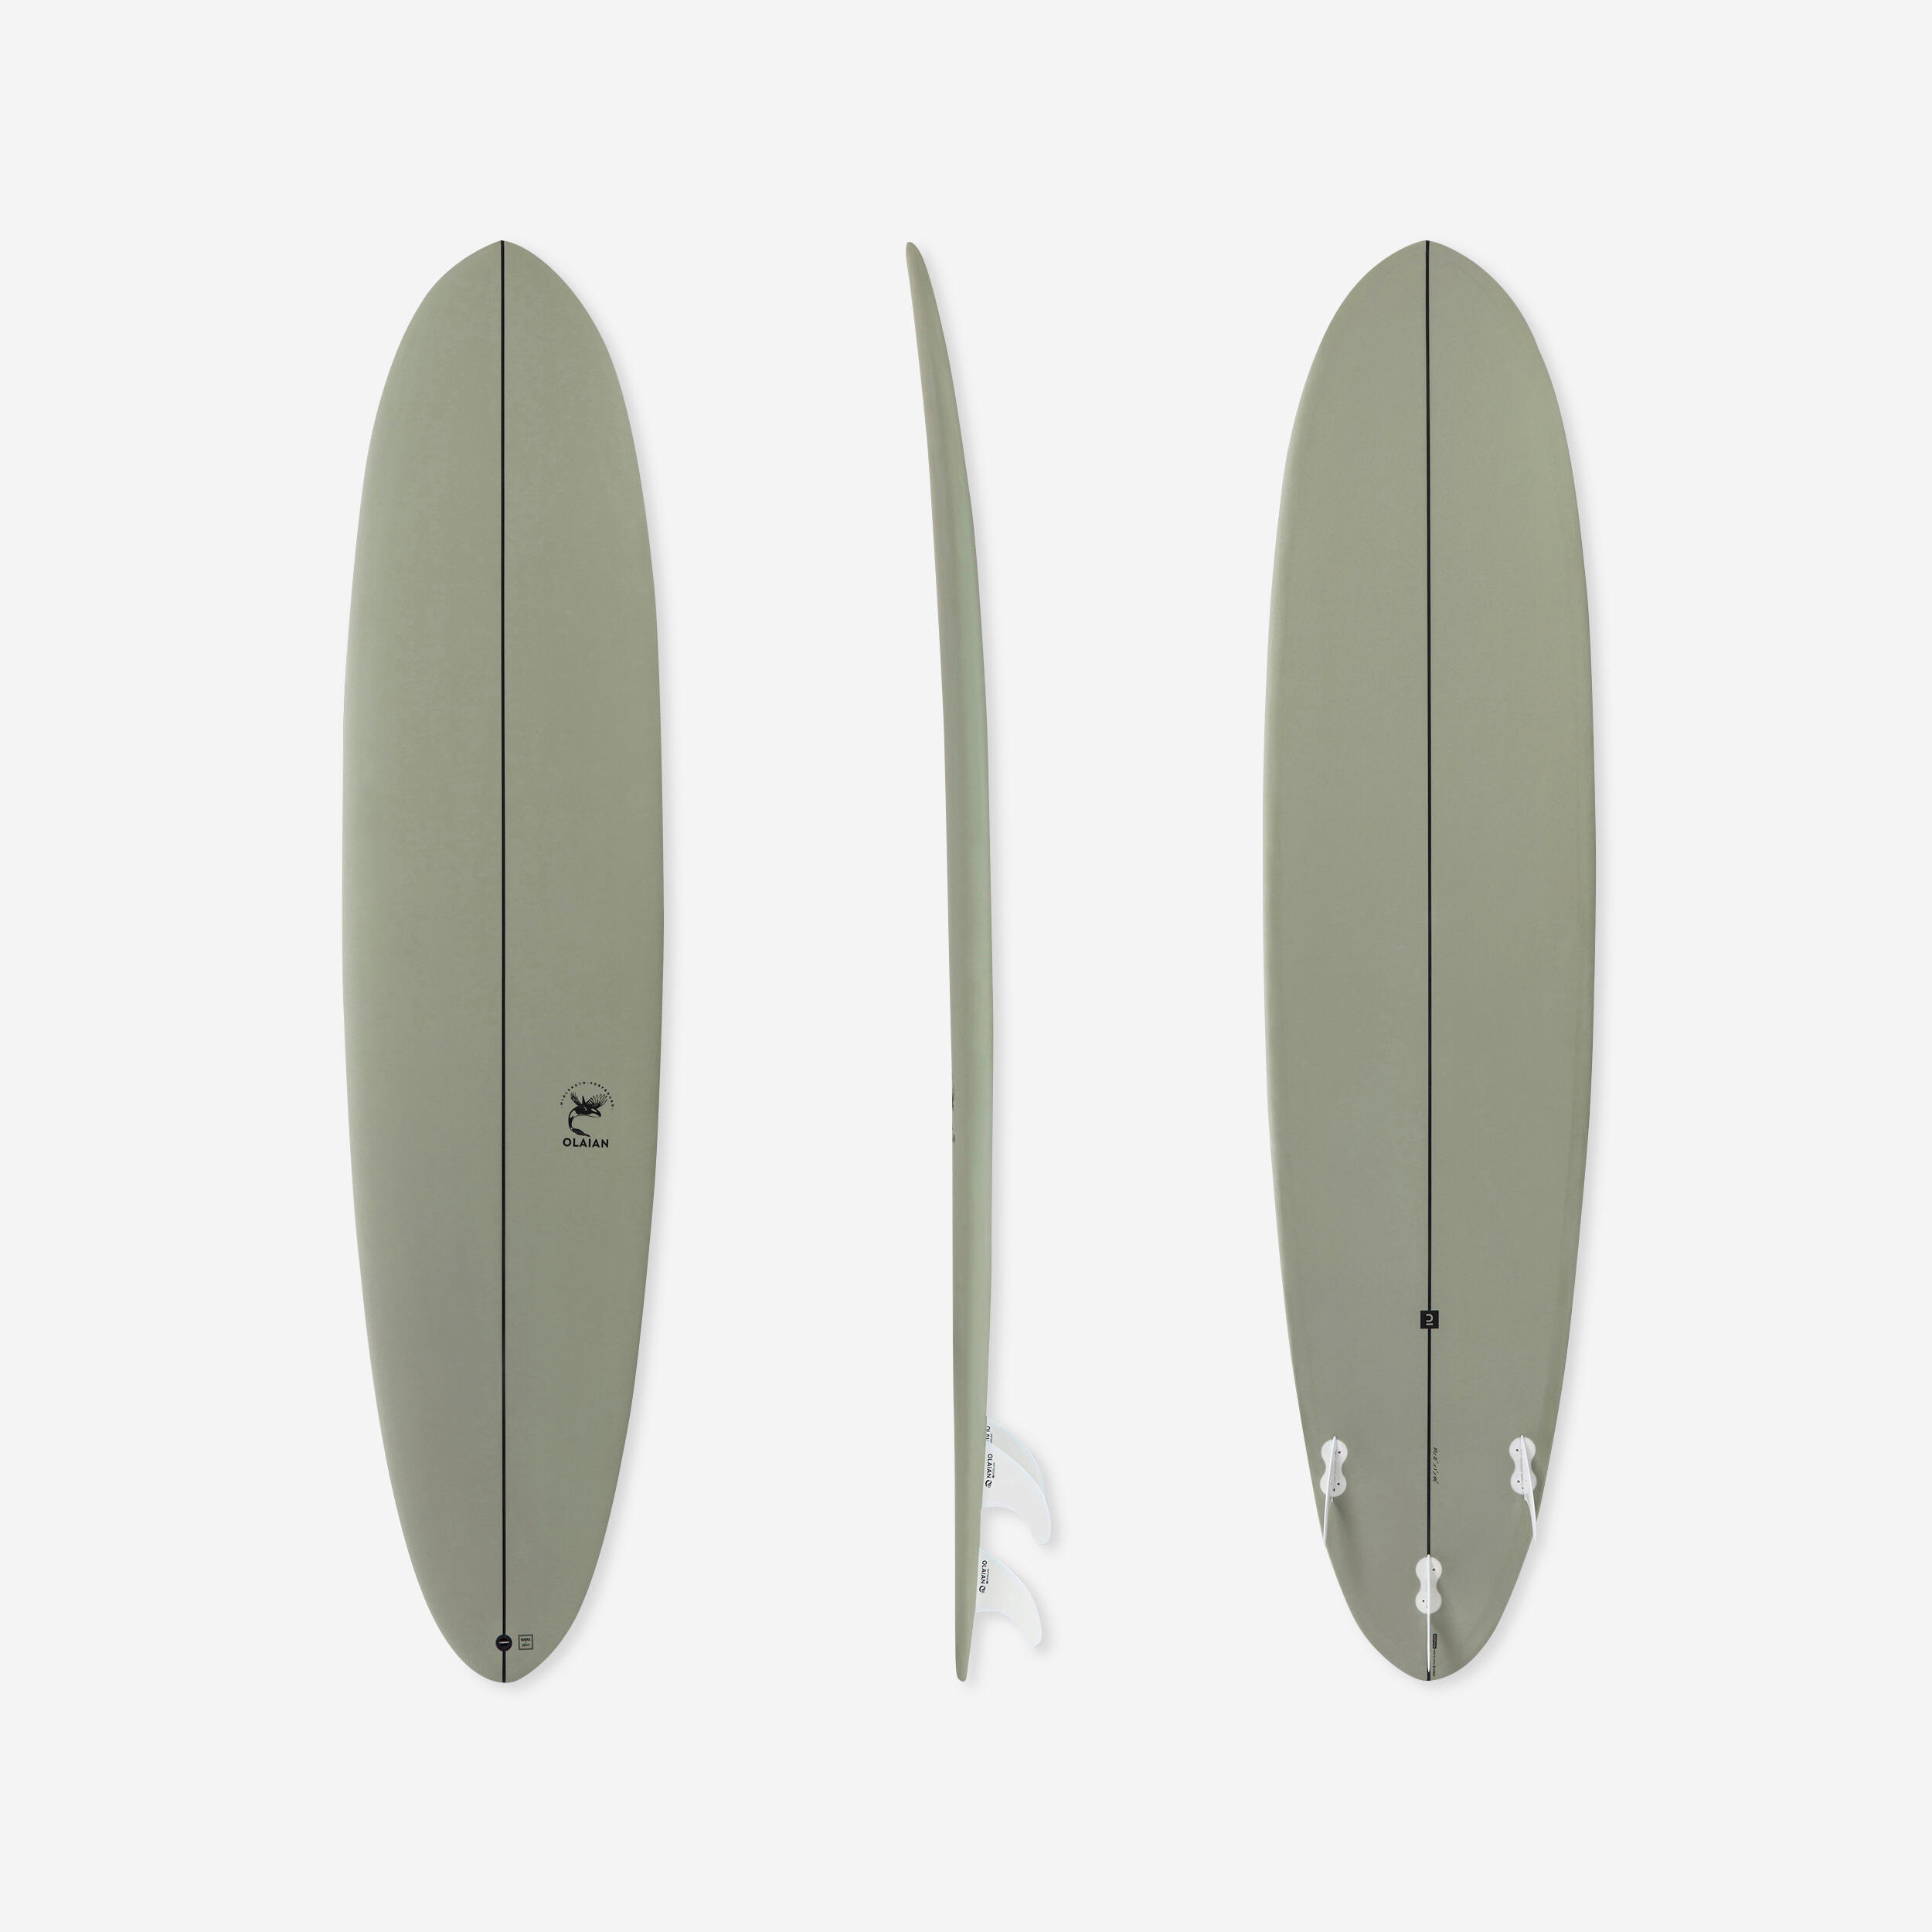 SURFBOARD 500 Hybrid 8' with 3 Fins. 1/15